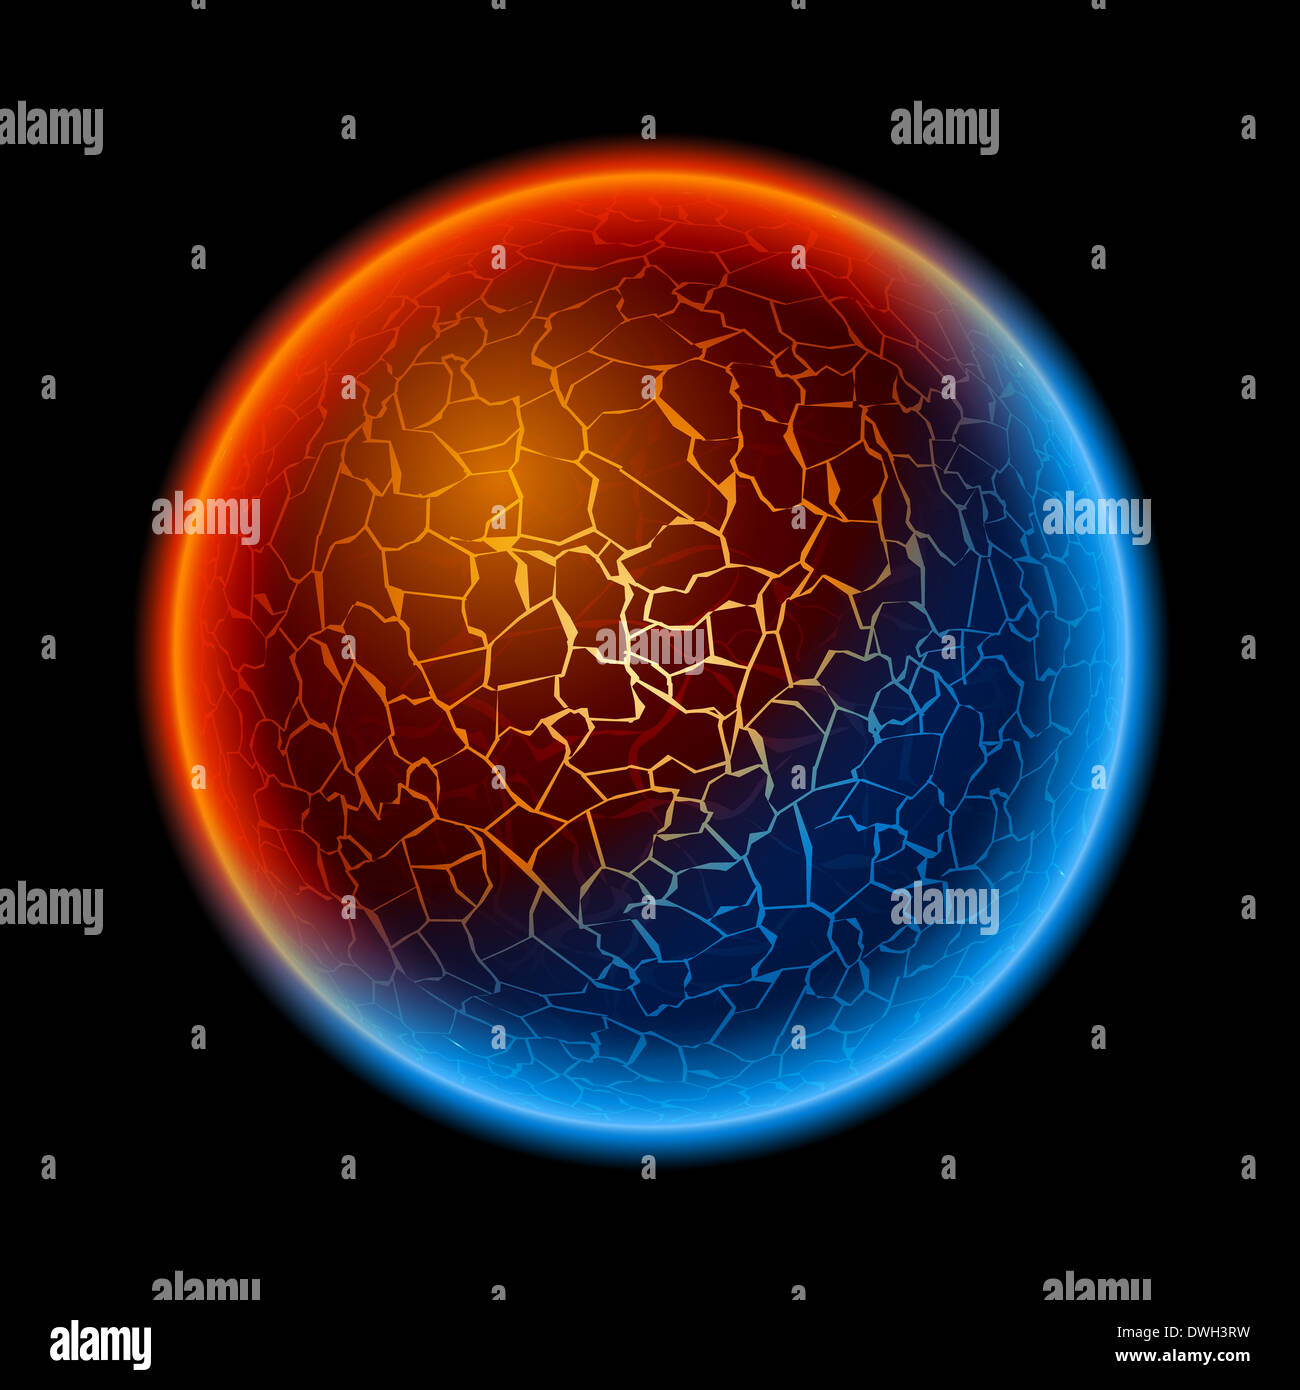 Fire and ice ball planet. Illustration on black background Stock Photo